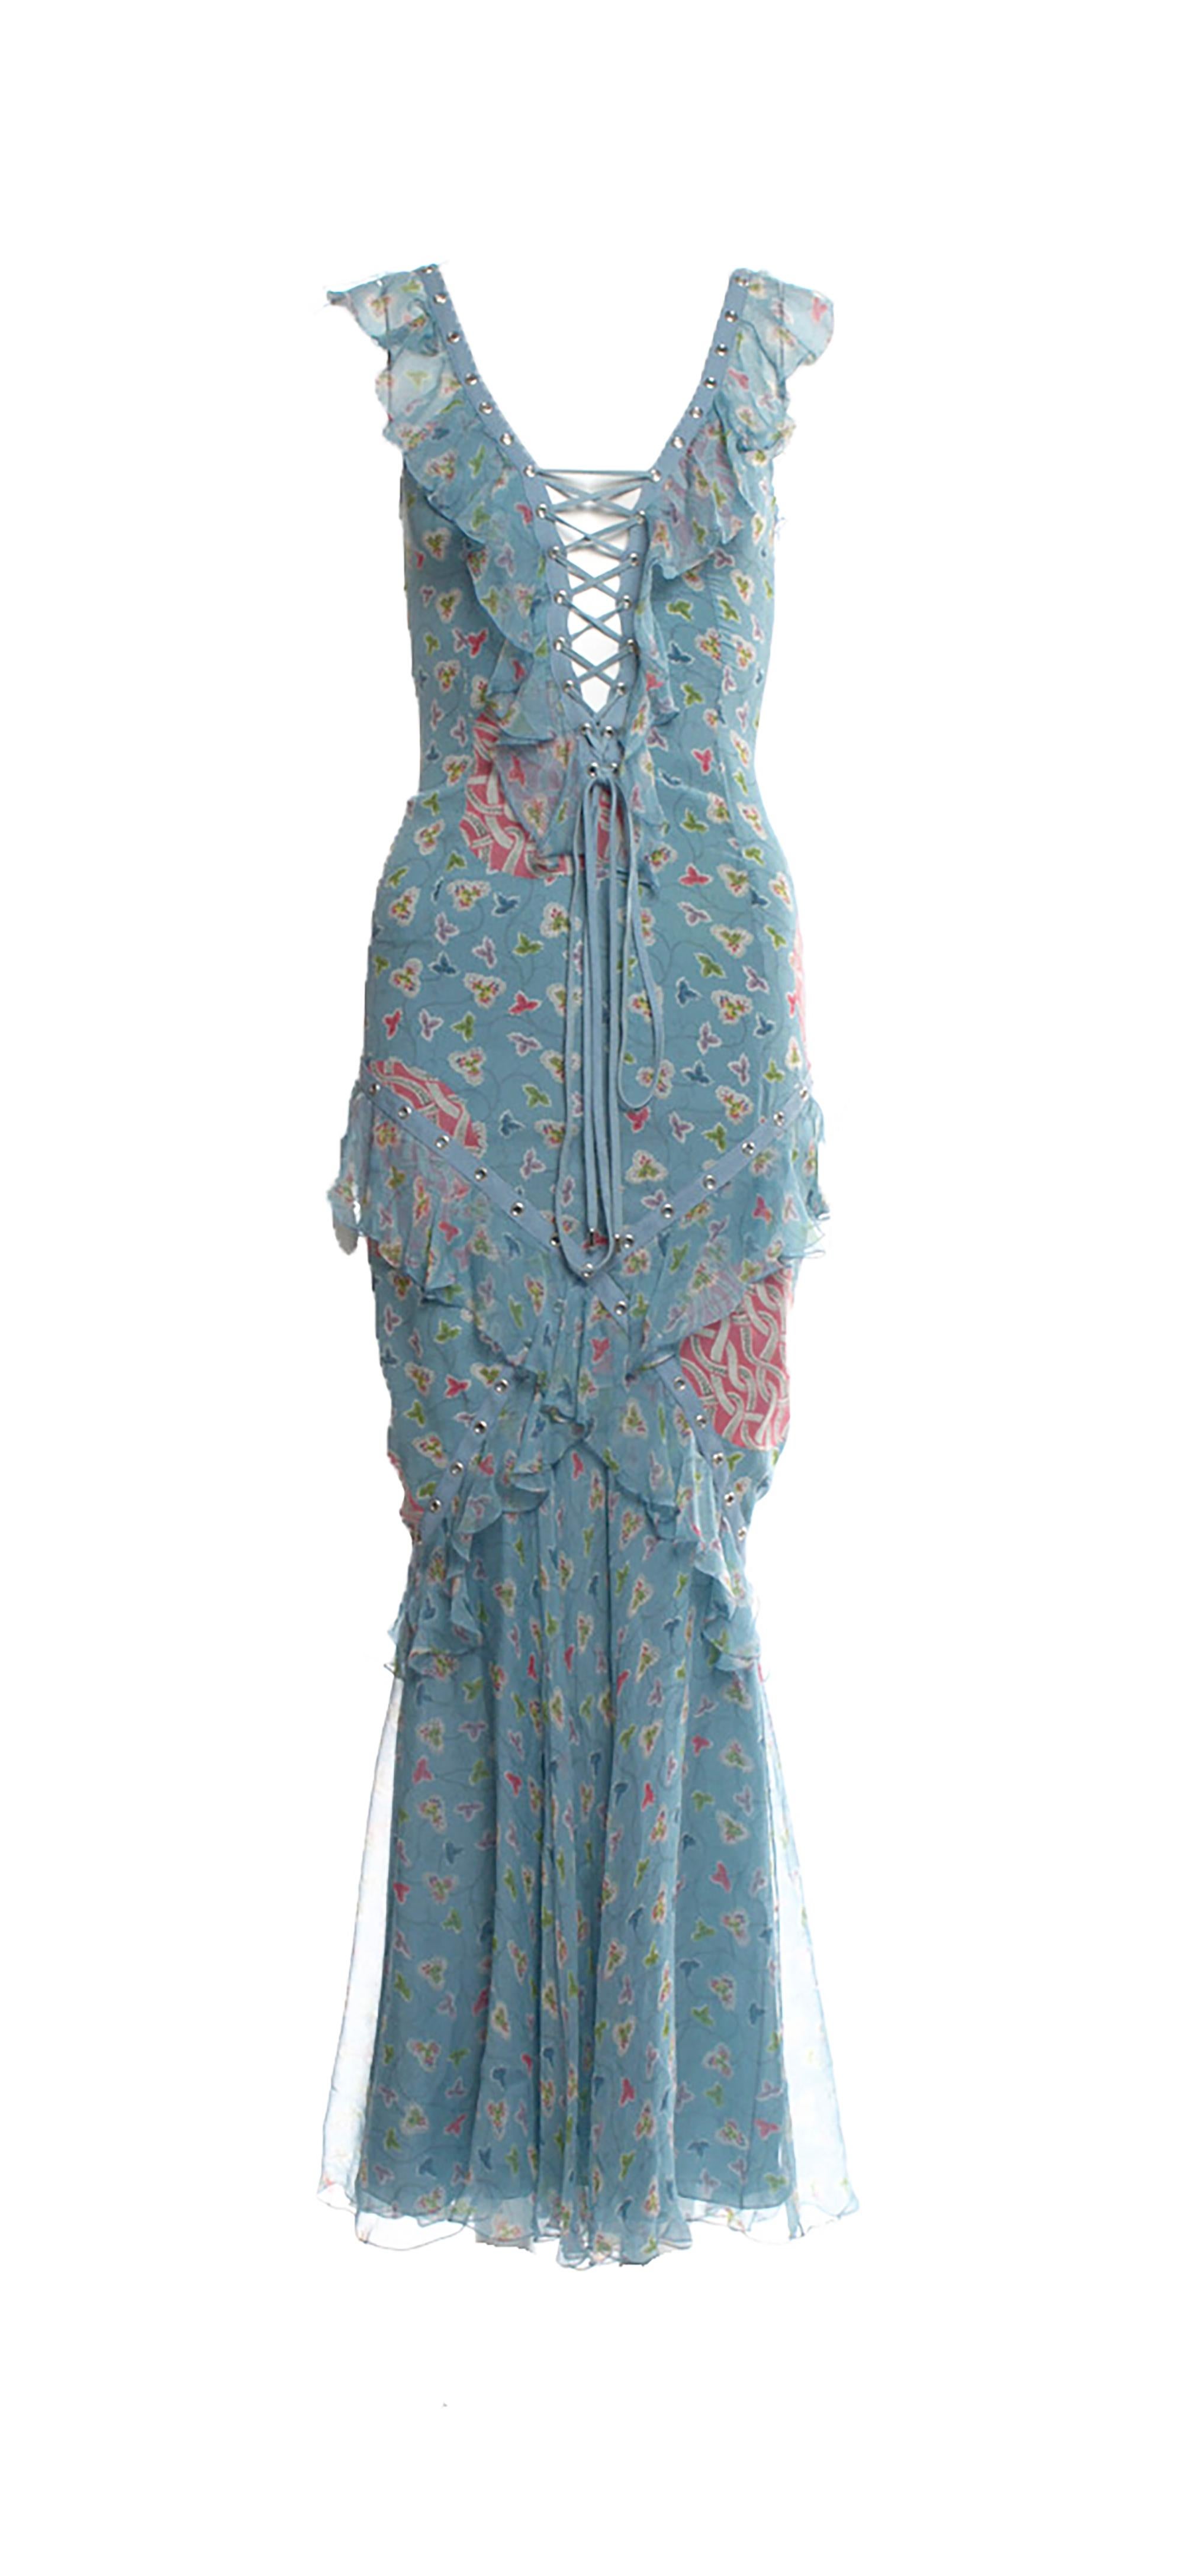 Gray 2003 S/S Christian Dior blue floral gown by Galliano 